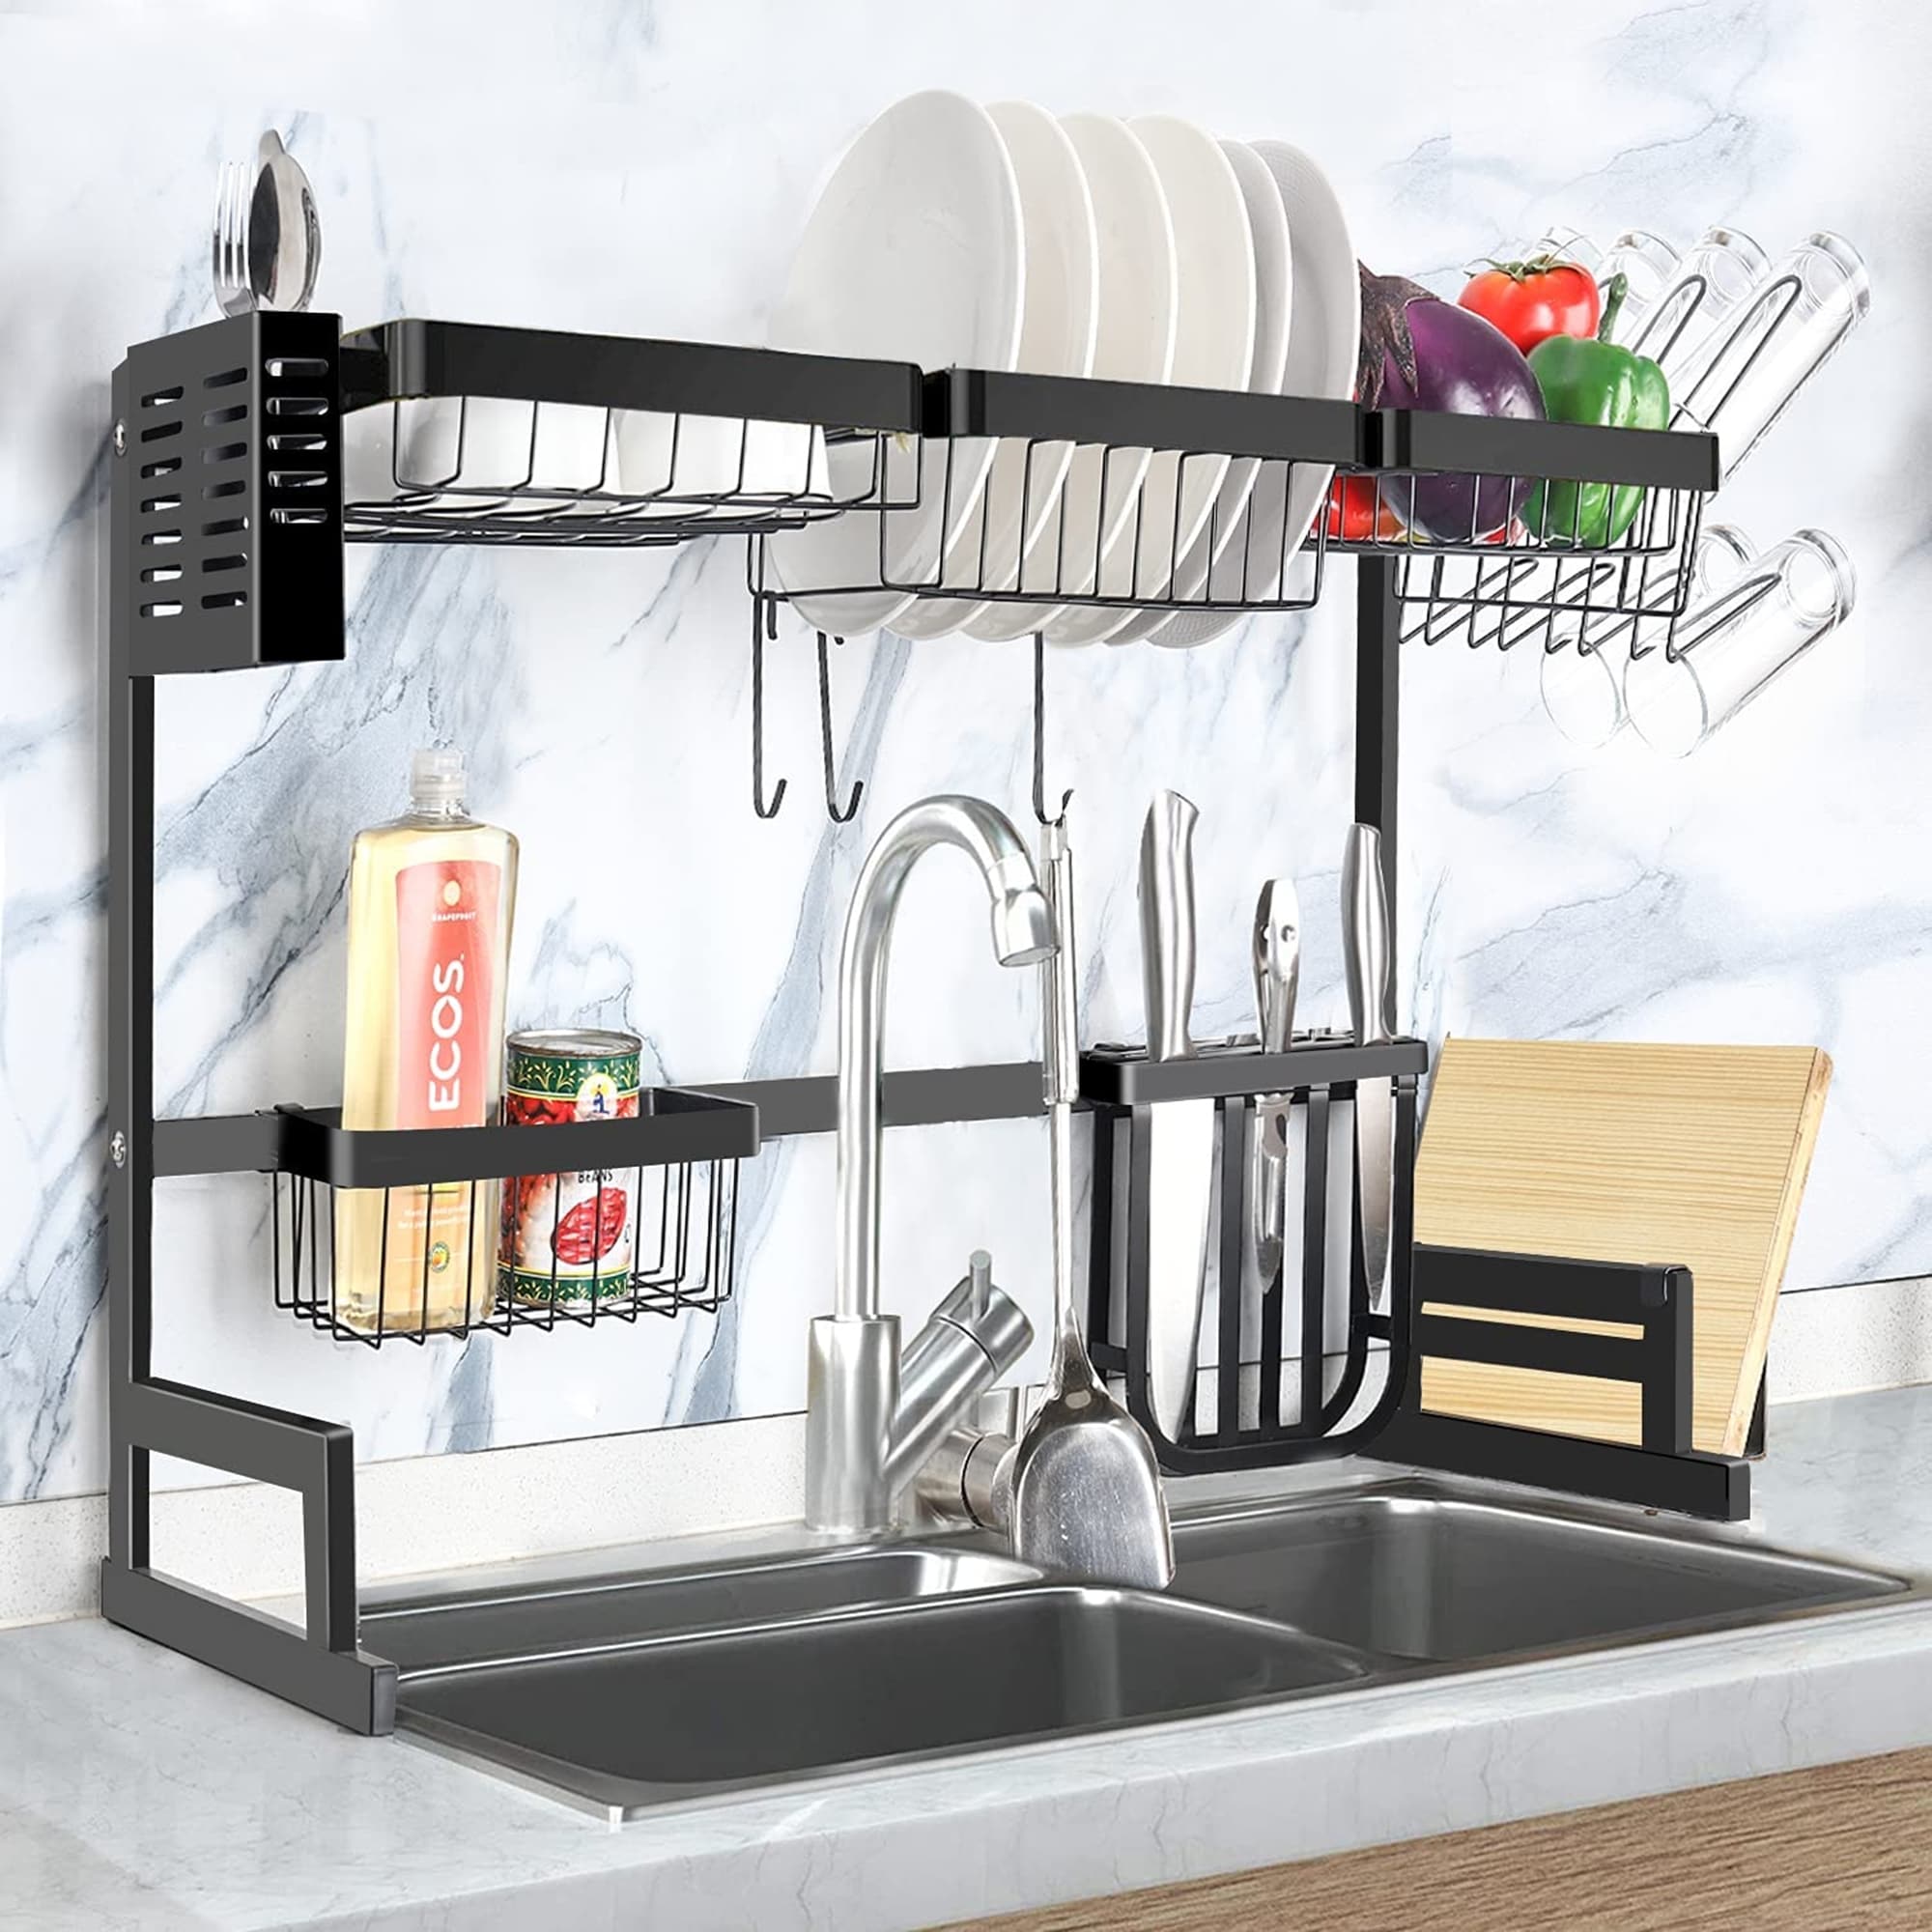 https://ak1.ostkcdn.com/images/products/is/images/direct/329d24e5b9e9fc1a3ca22ae419aee69eff1a25cd/Adjustable-Stainless-Steel-Over-Sink-Dish-Drying-Rack.jpg